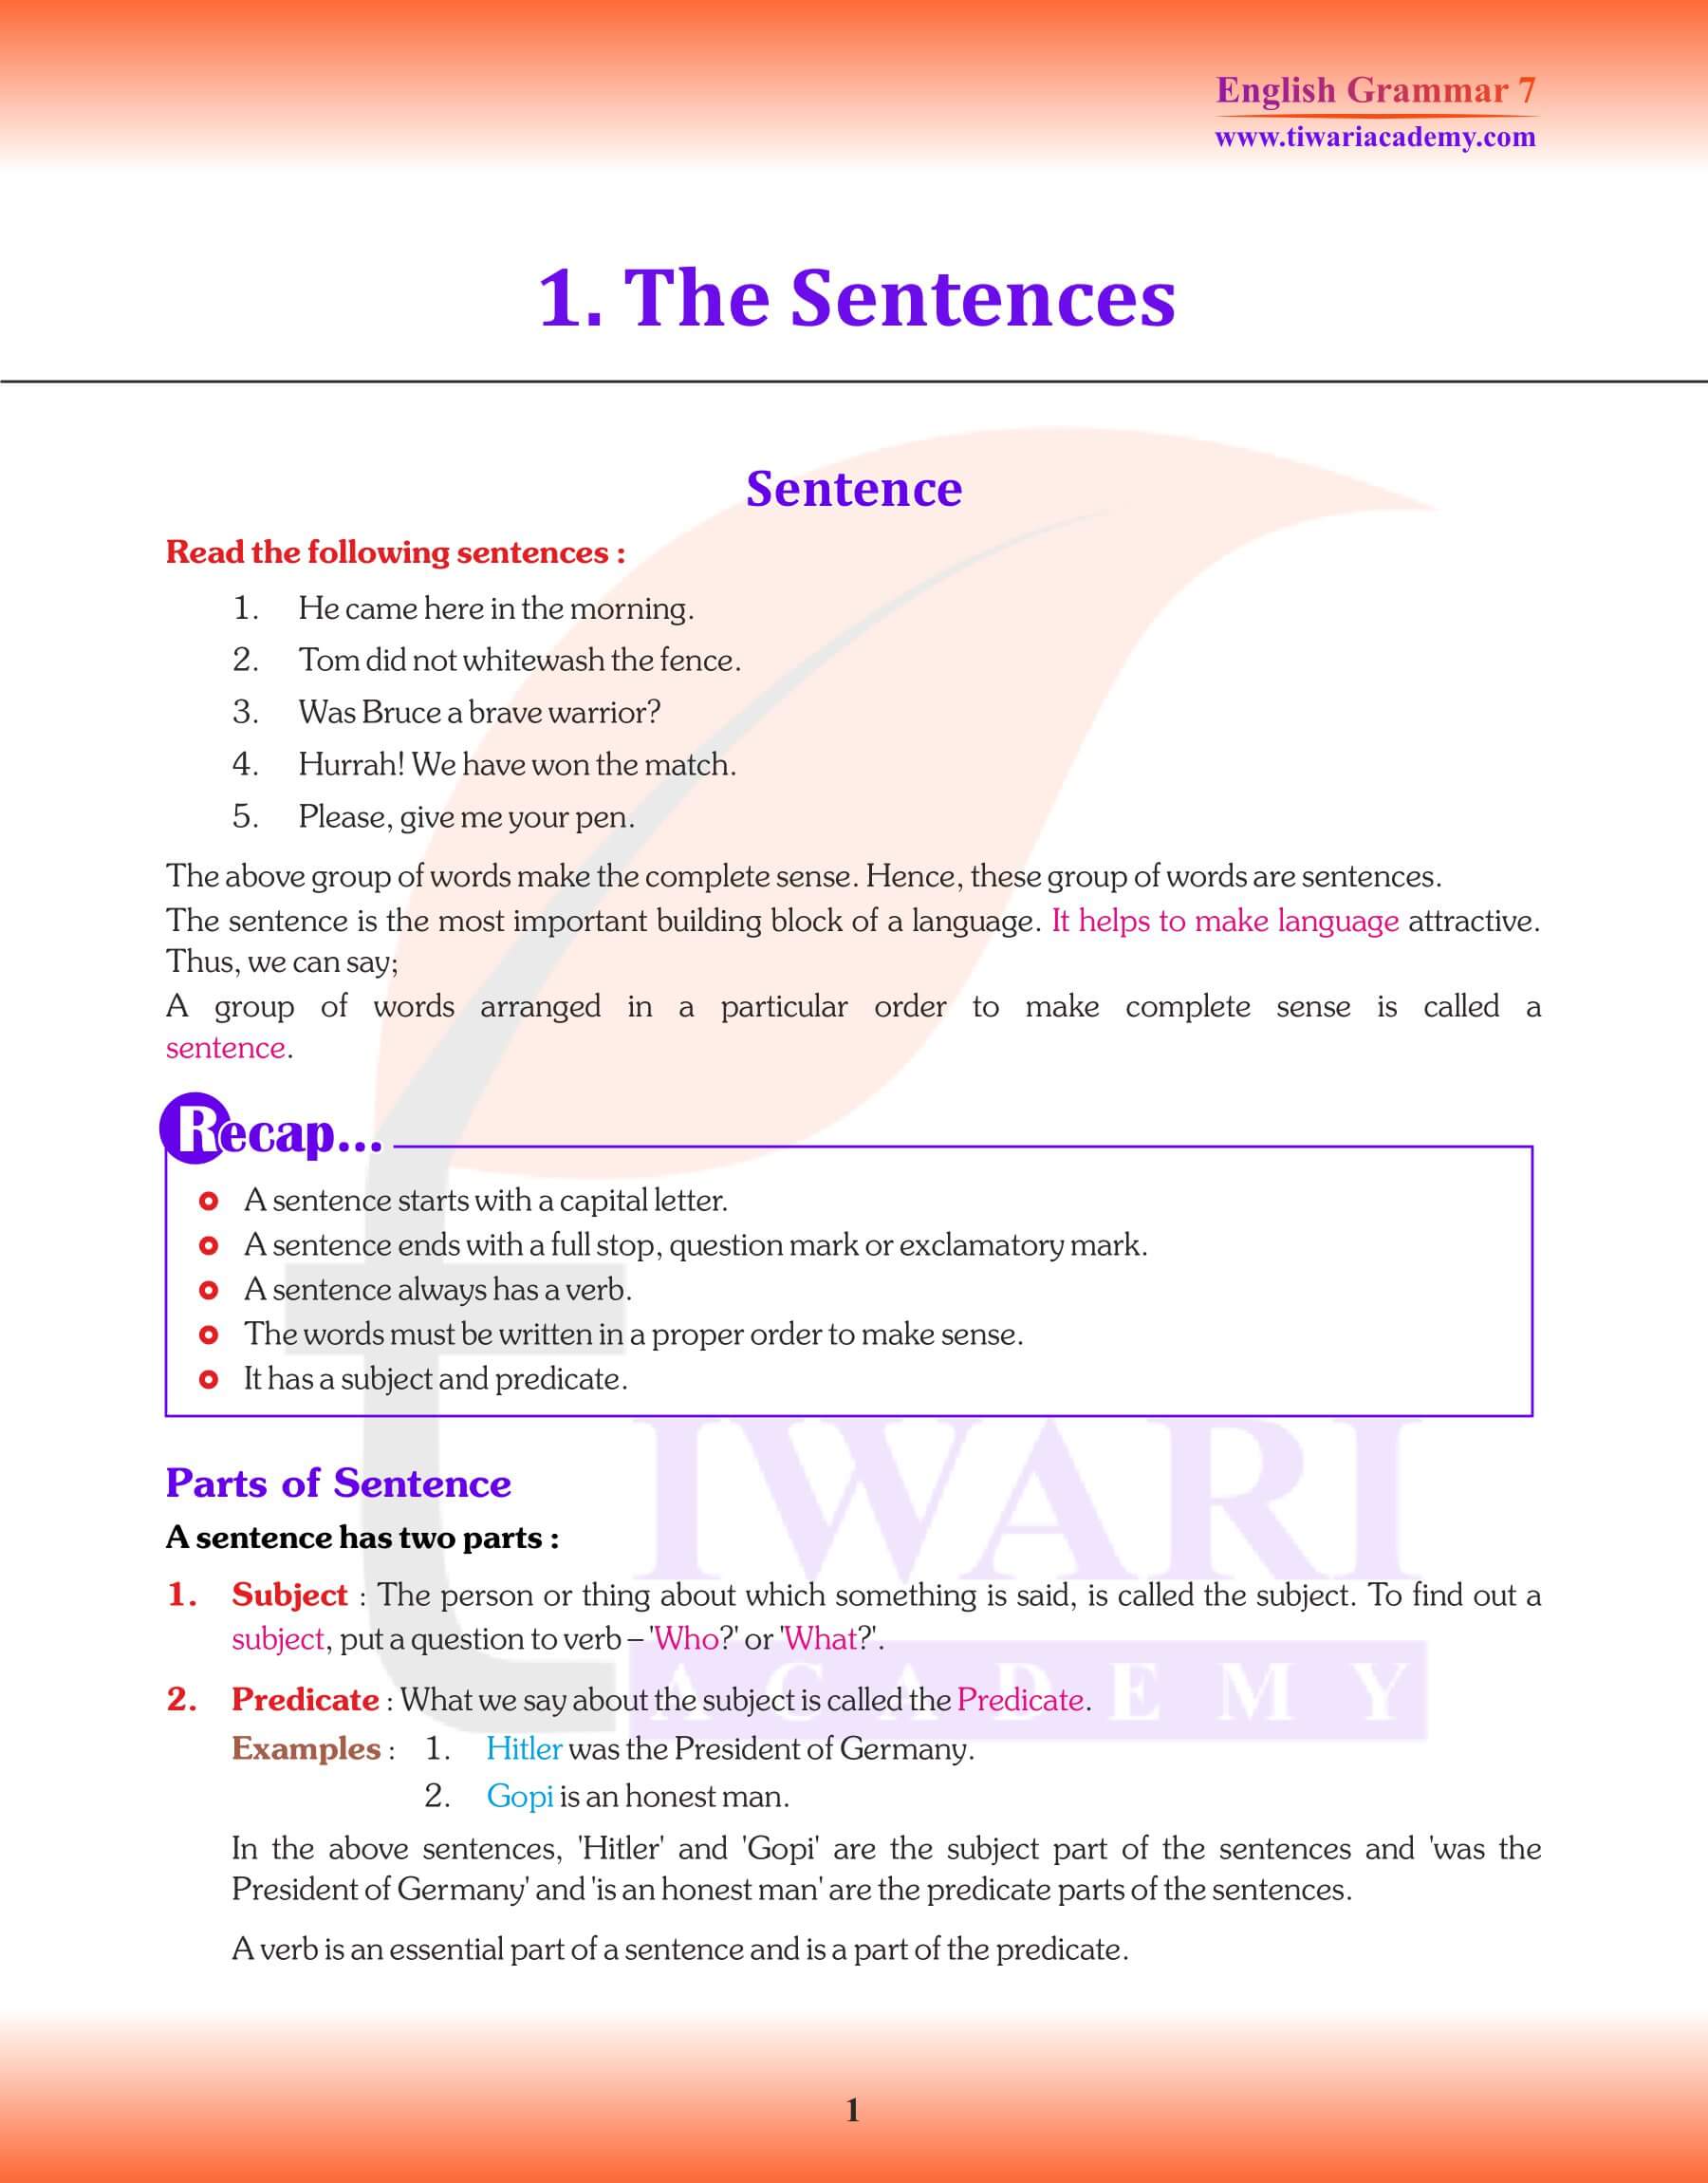 Class 7 English Grammar Chapter 1 Revision book